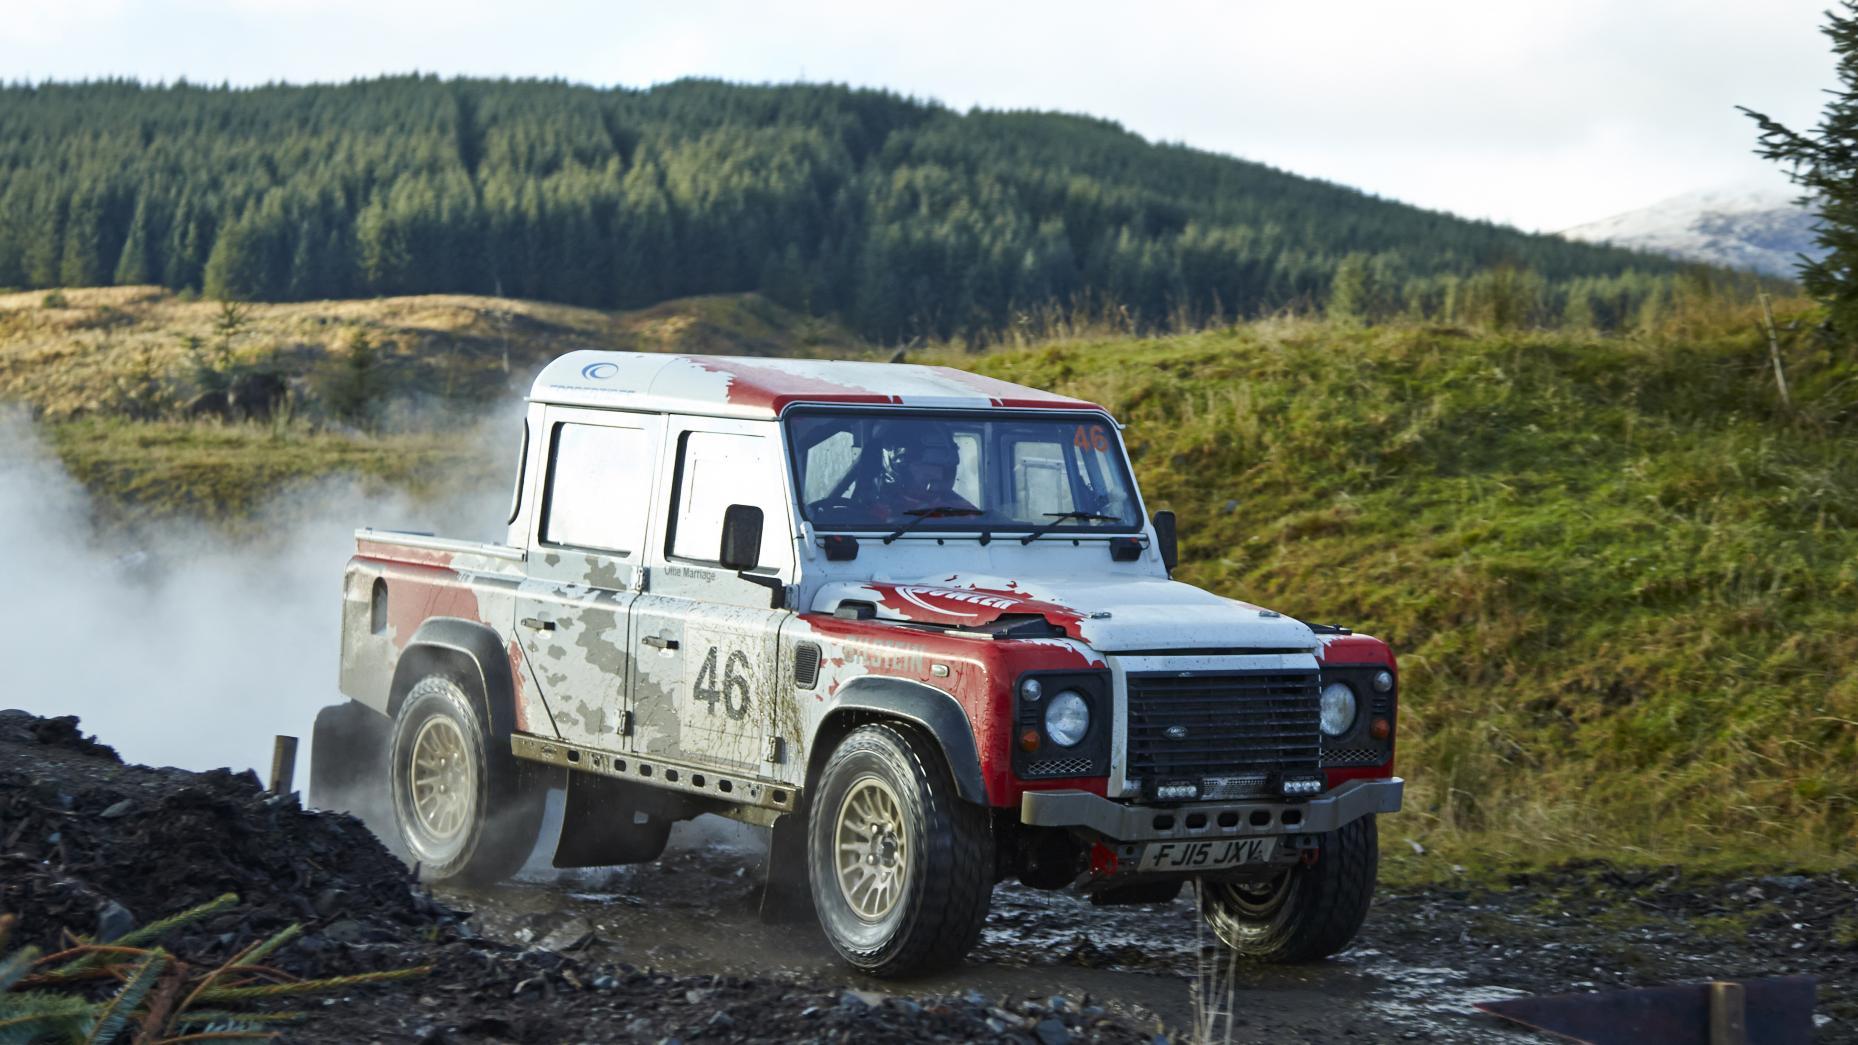 1. The Land Rover Defender rally car